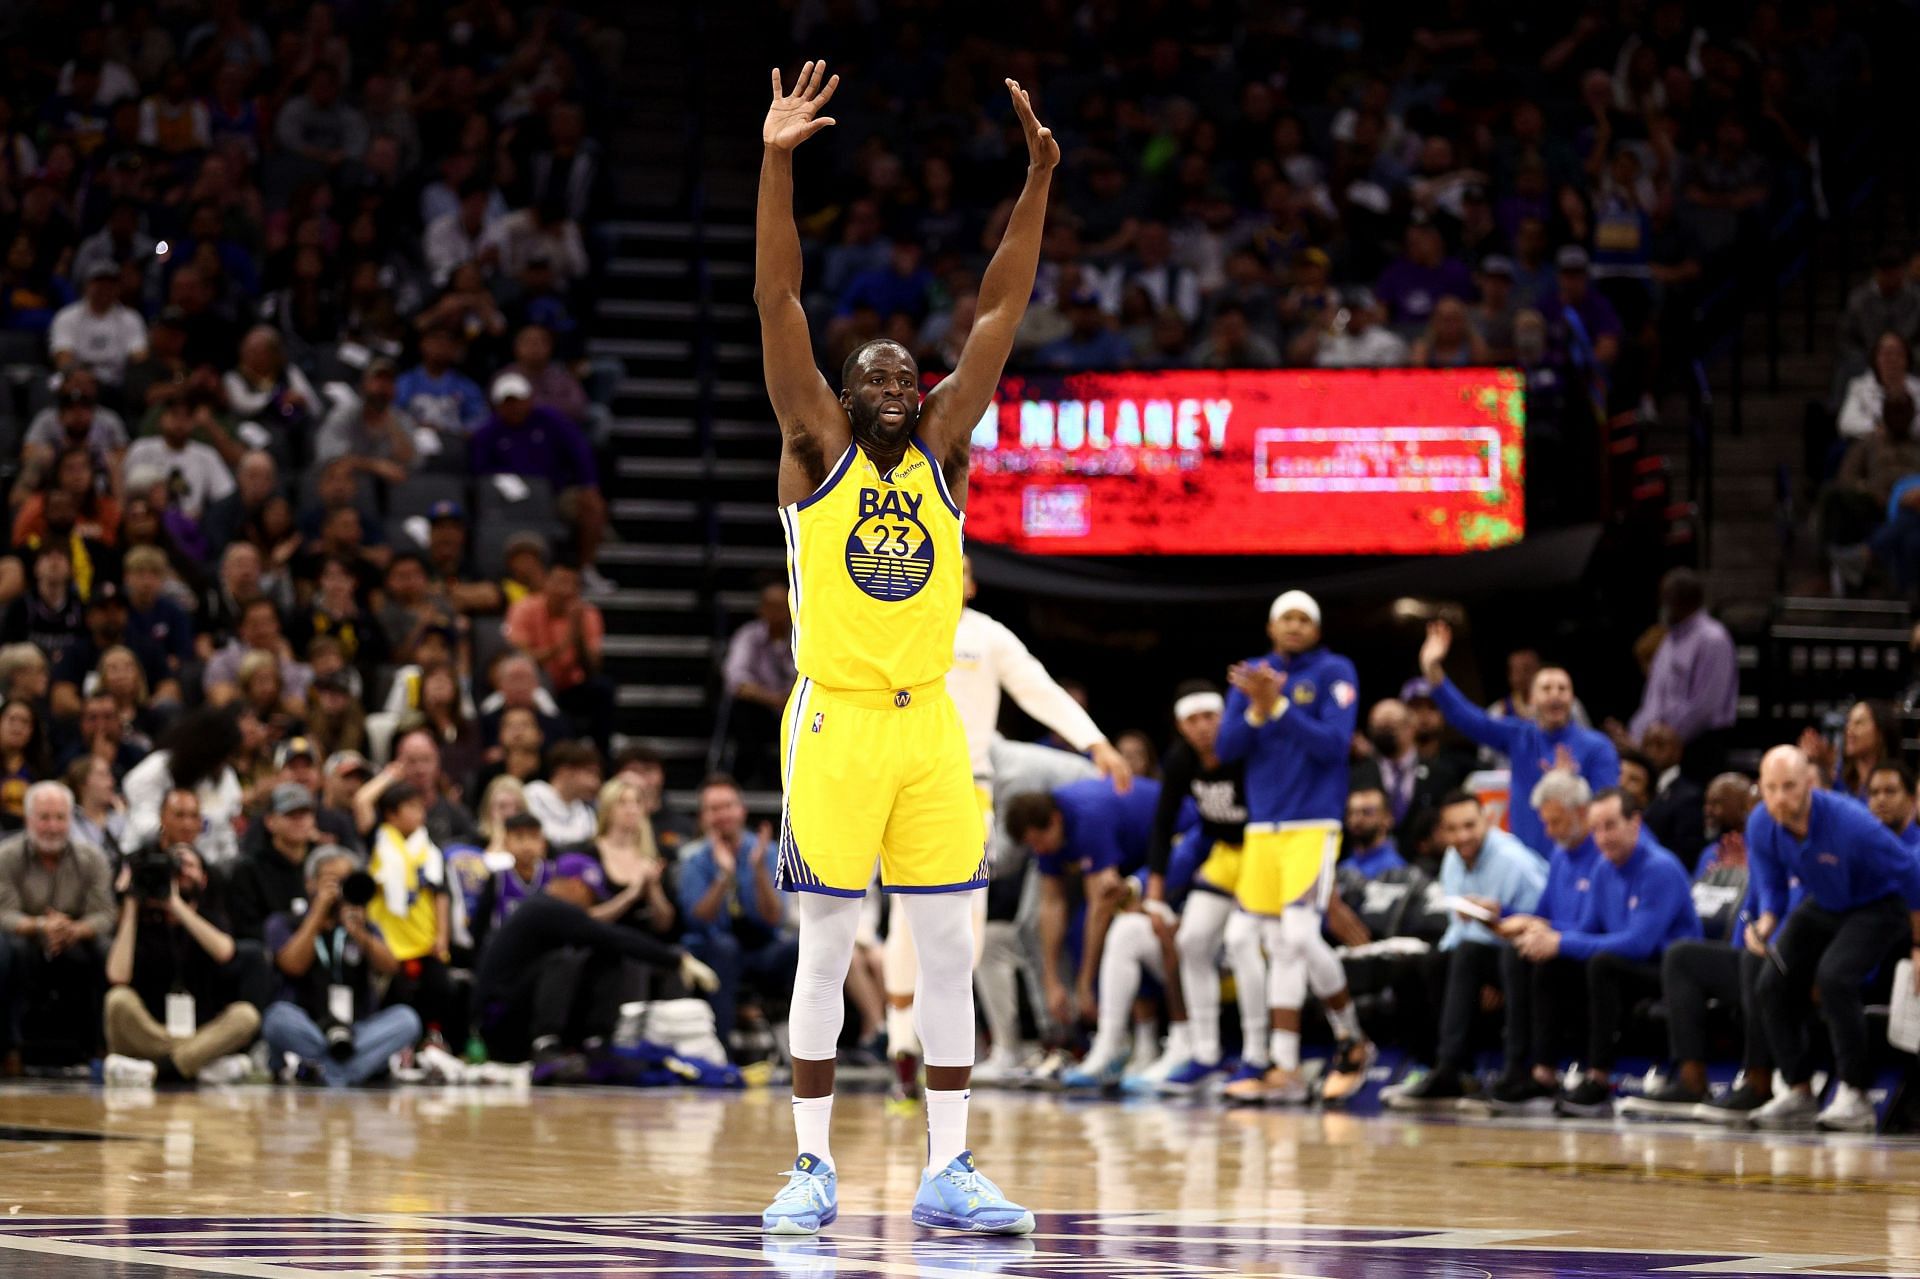 Draymond Green #23 of the Golden State Warriors reacts after the Warriors scored a basket against the Sacramento Kings in the second half at Golden 1 Center on April 03, 2022 in Sacramento, California.